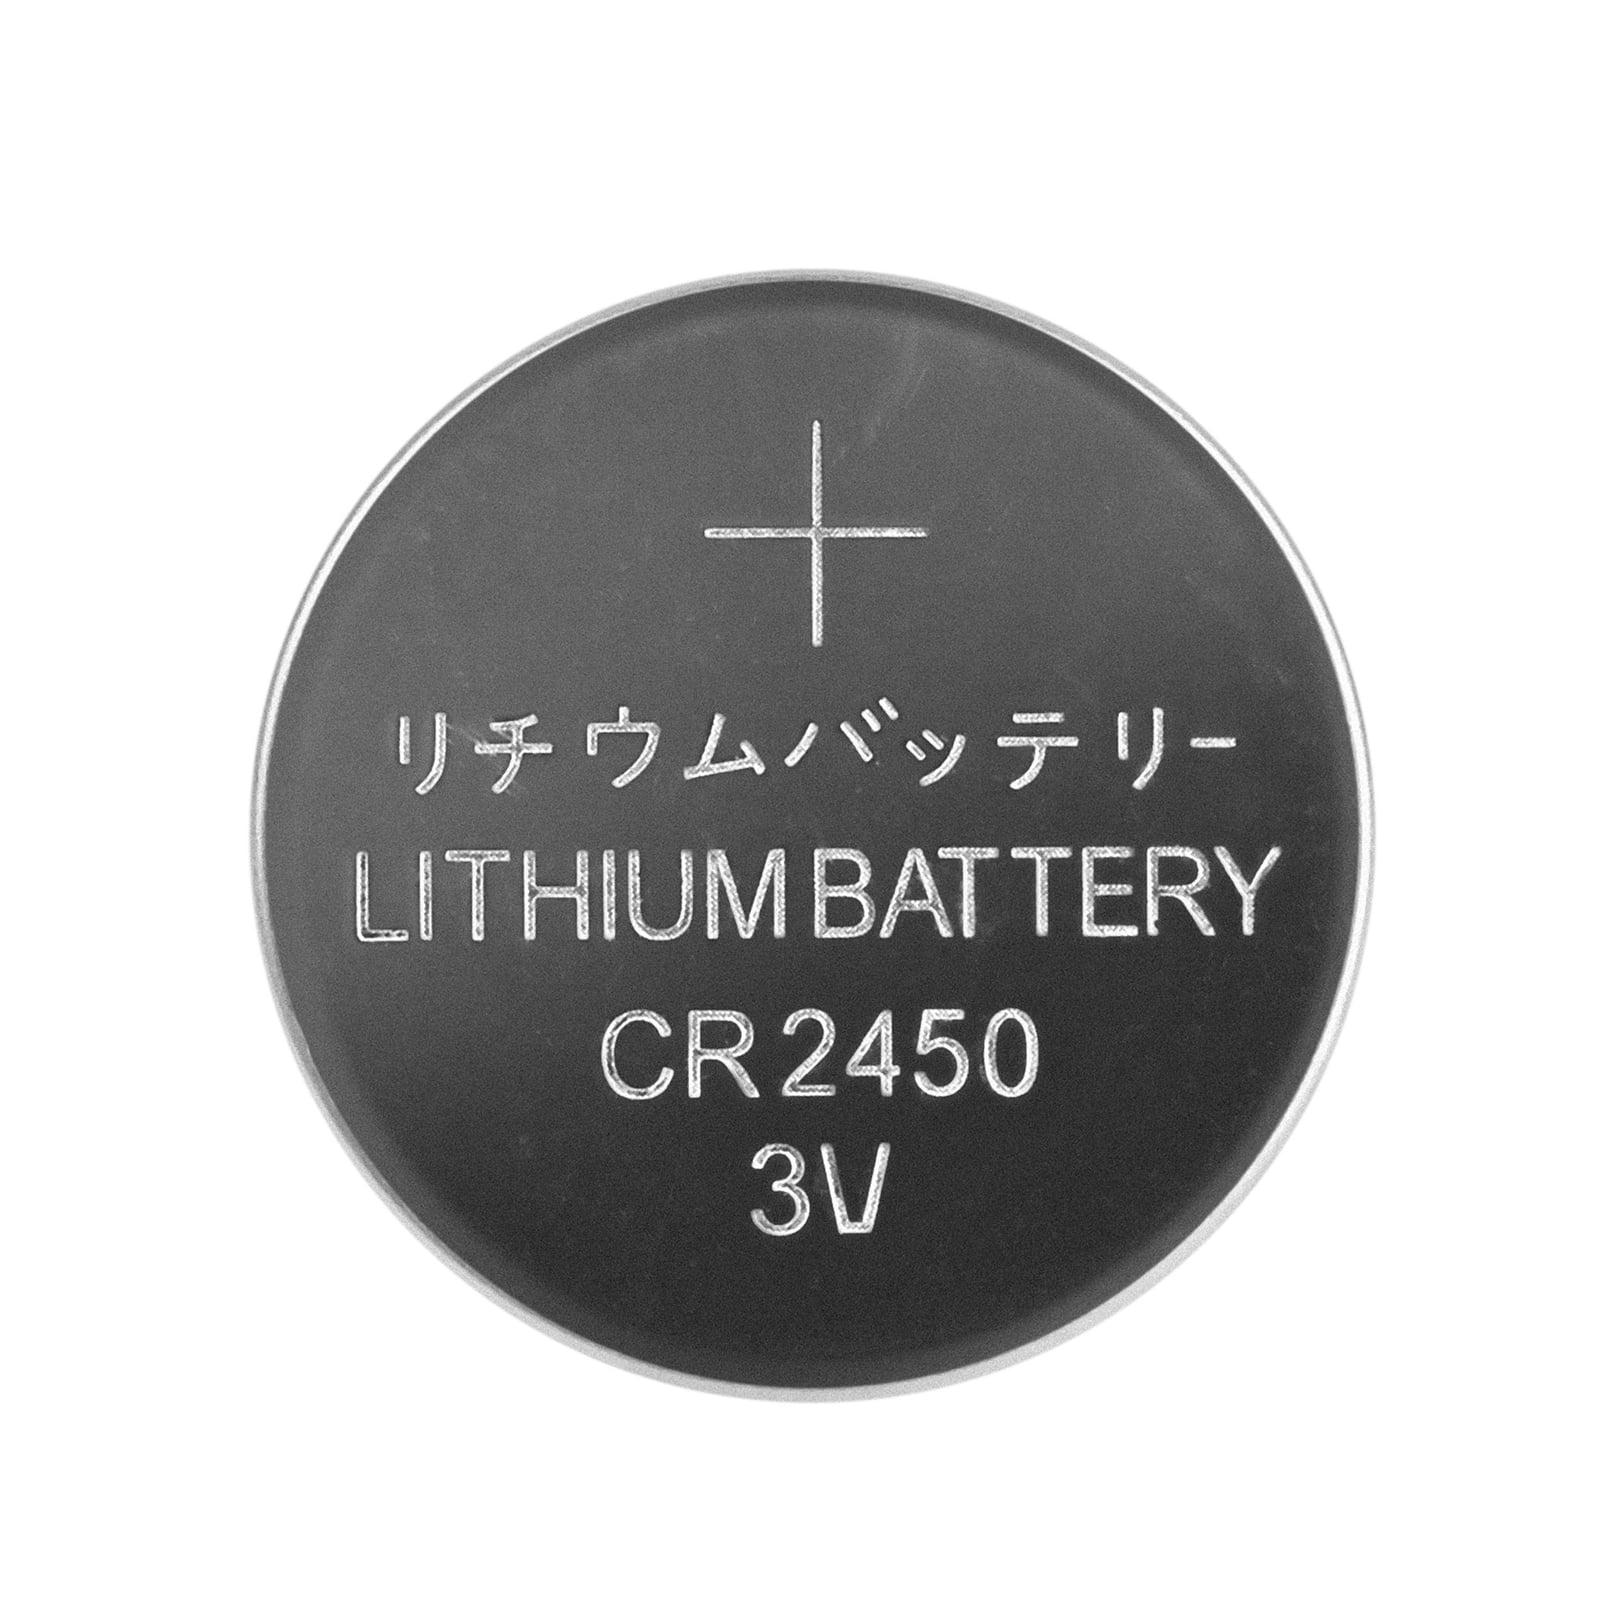 Pile CR2450 3V Lithium fiable et durable - INDUCELL